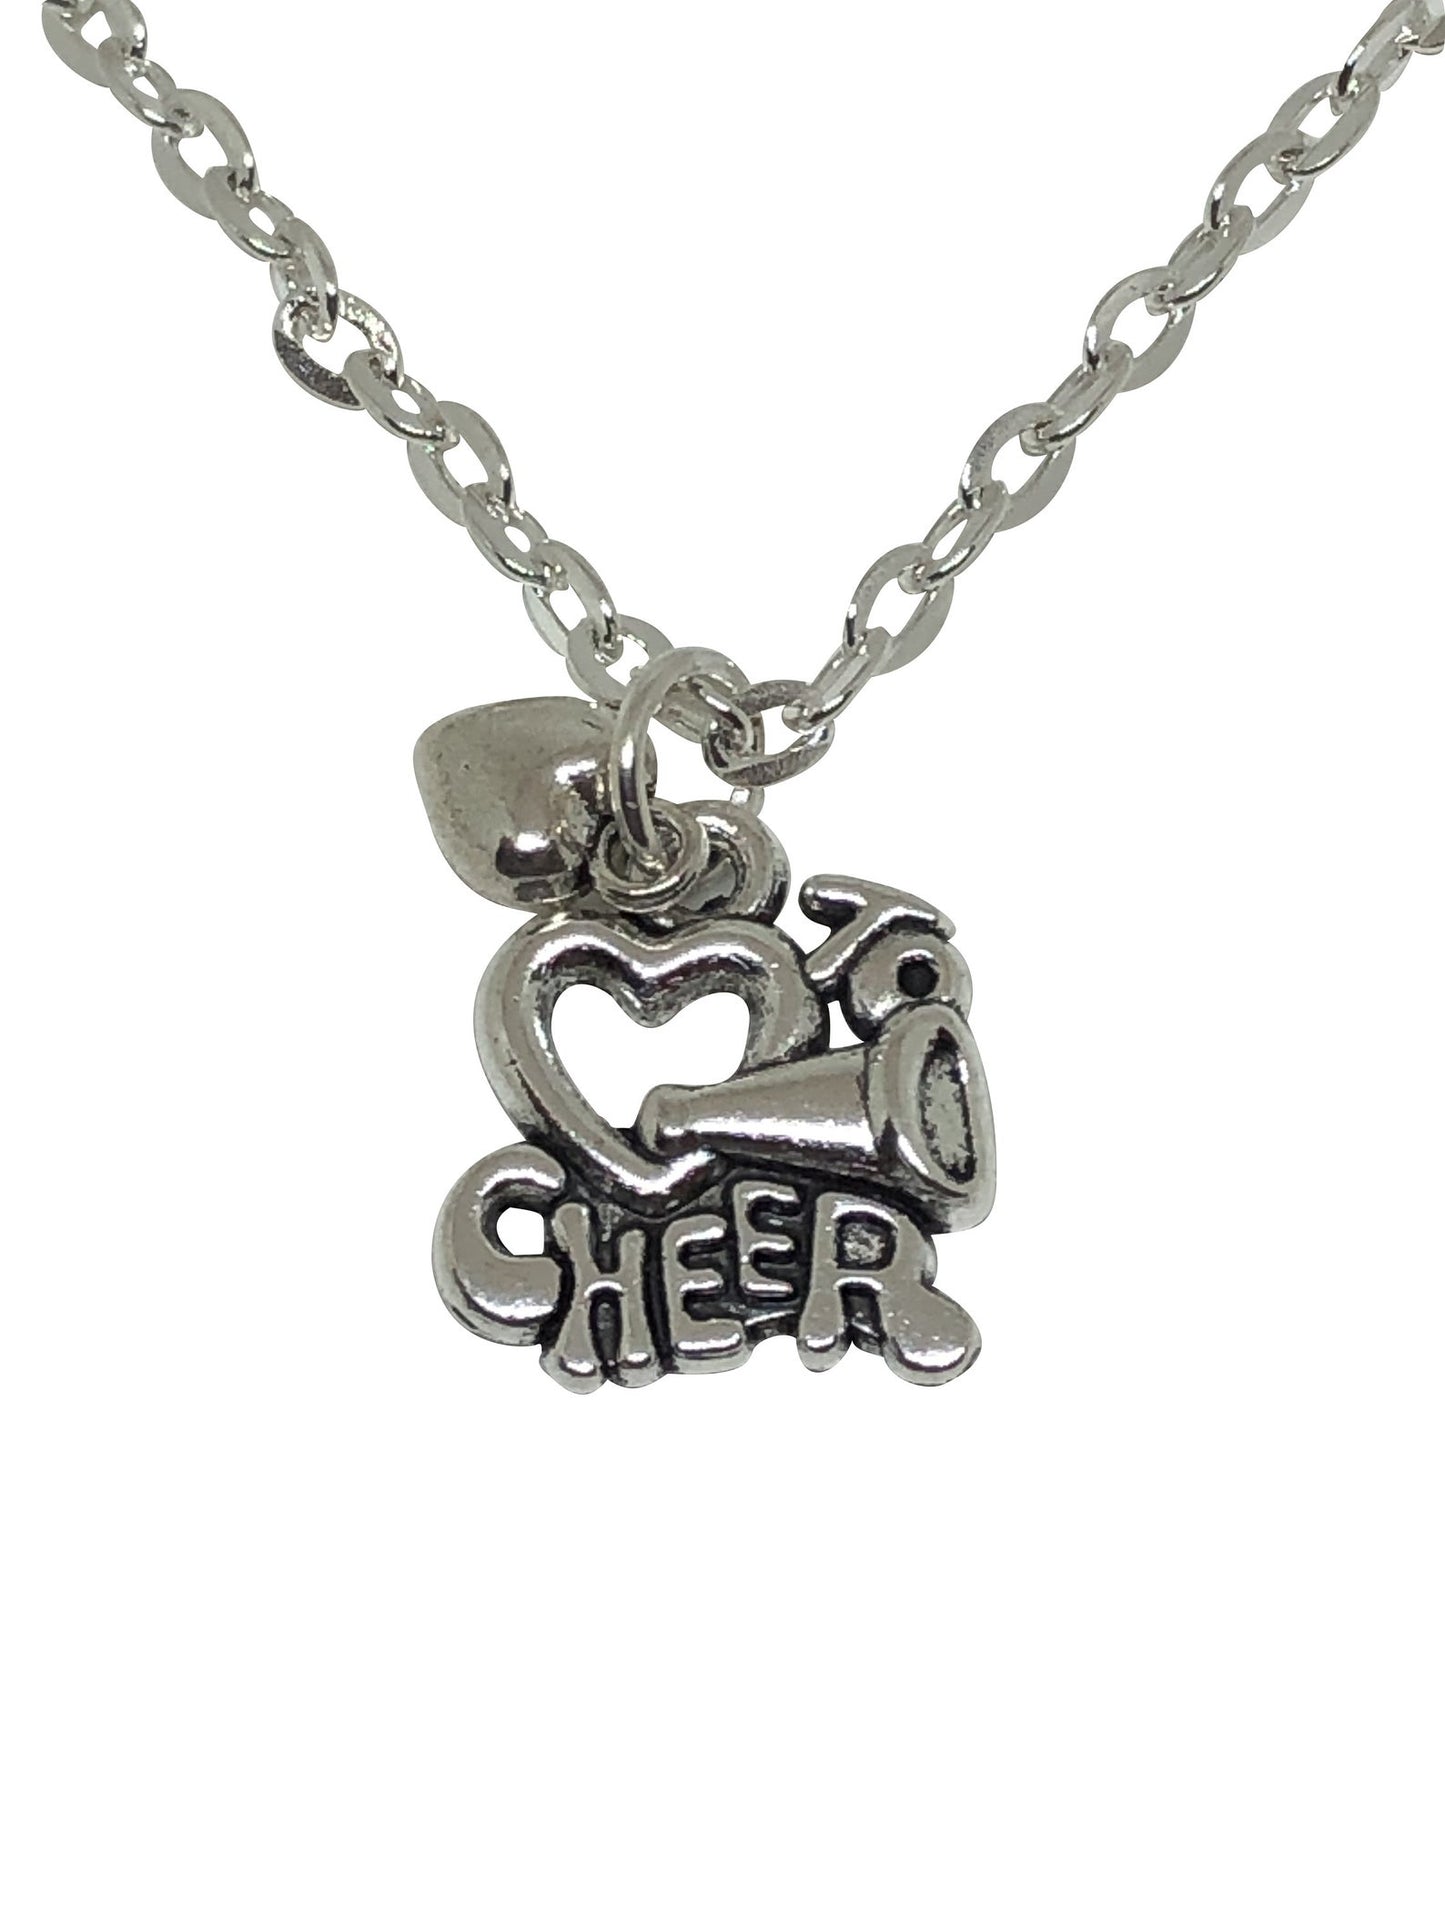 Cheerleader Charm - Choose from Silver or Gold-Plate - BeadifulBABY